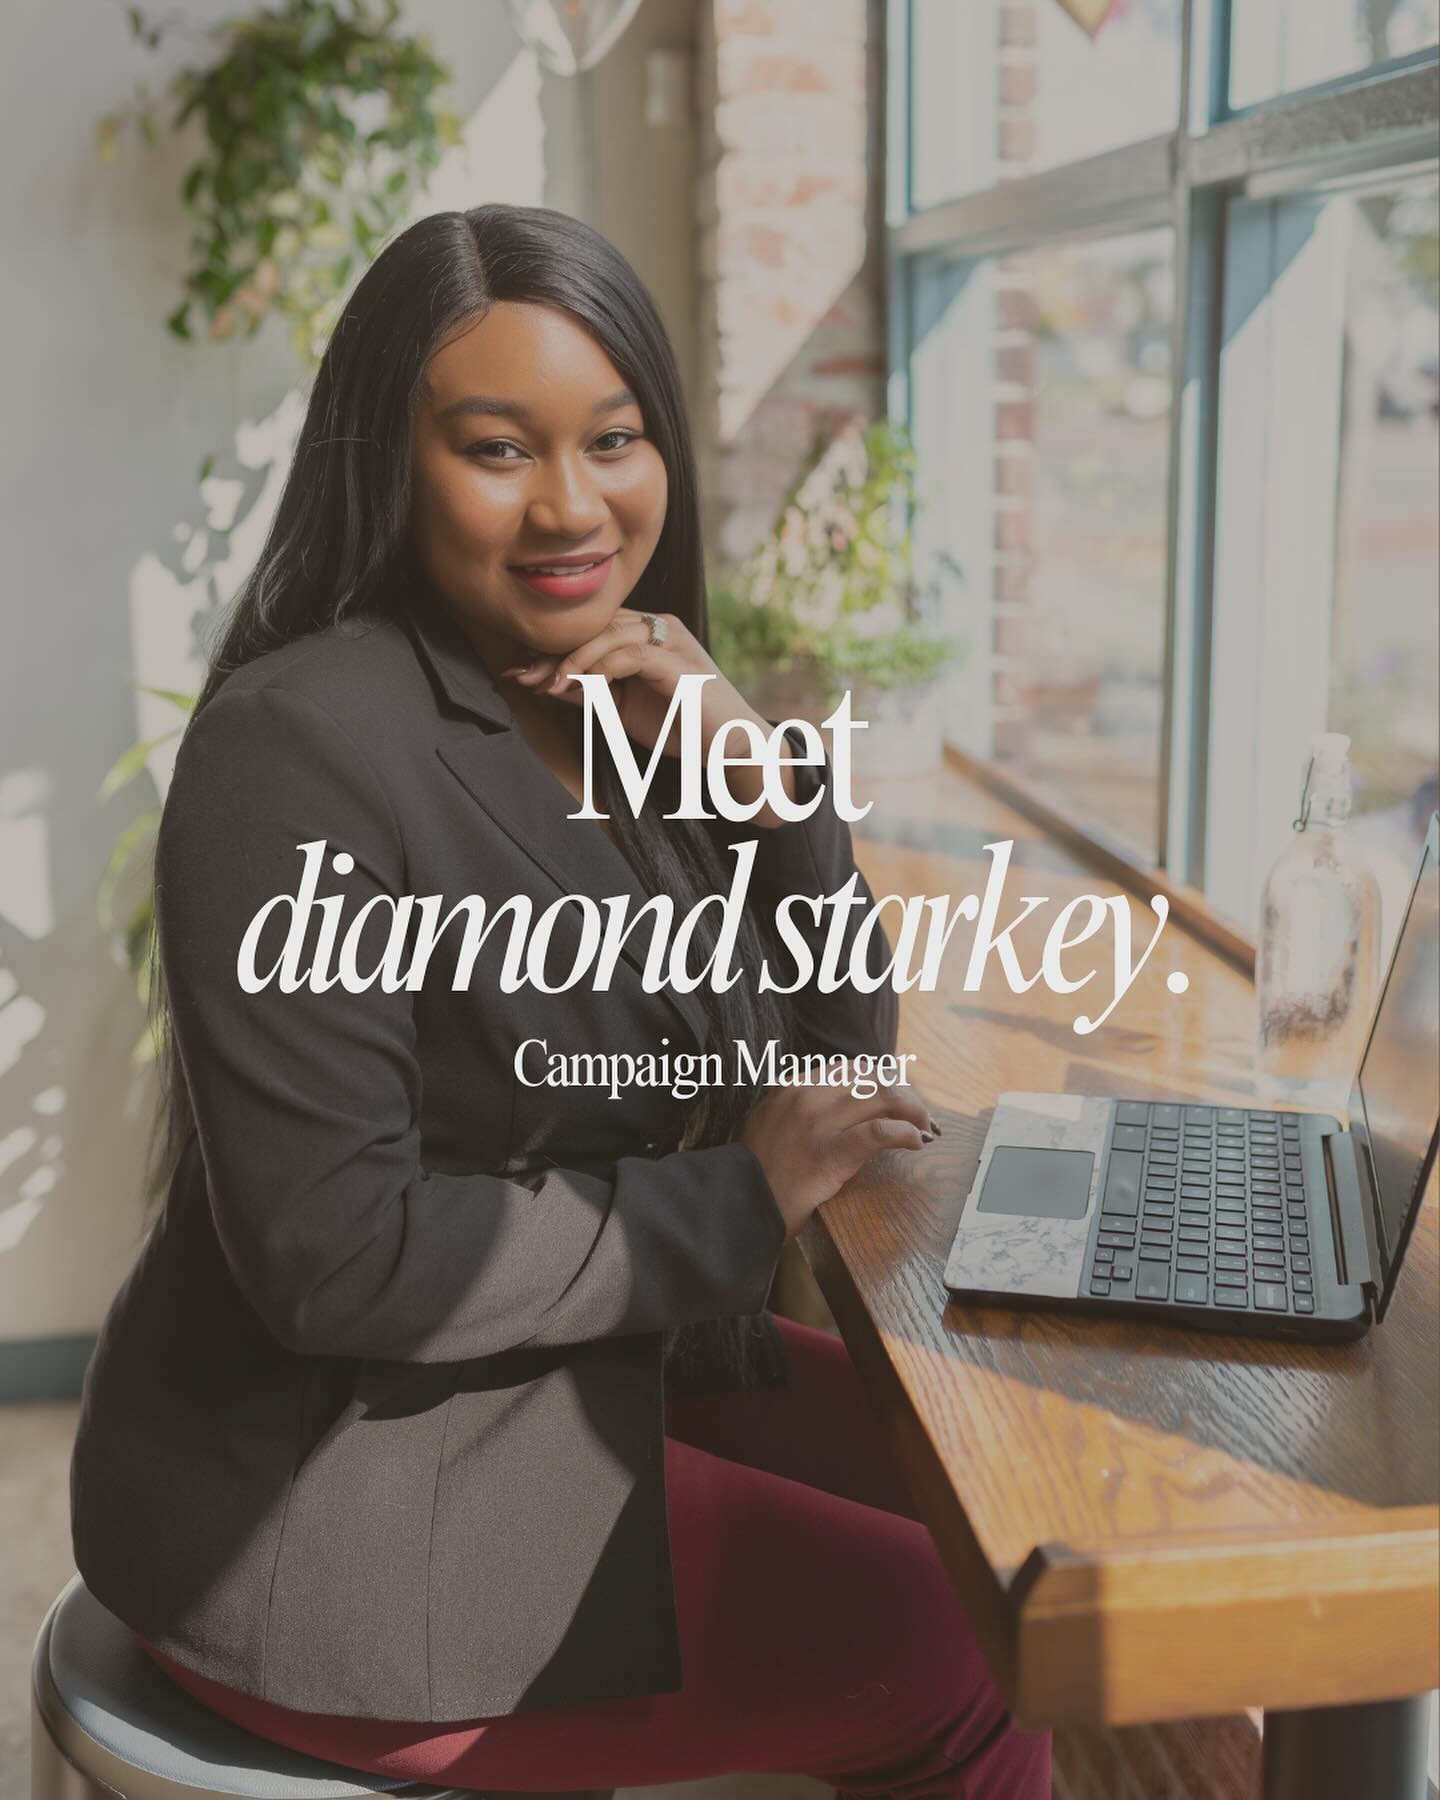 Meet Diamond, one of our amazing Campaign Managers here at illuminate! Diamond started her career in Social Media Marketing in 2020 helping brands utilize the power of social media. After two years of helping small businesses partner with influencers